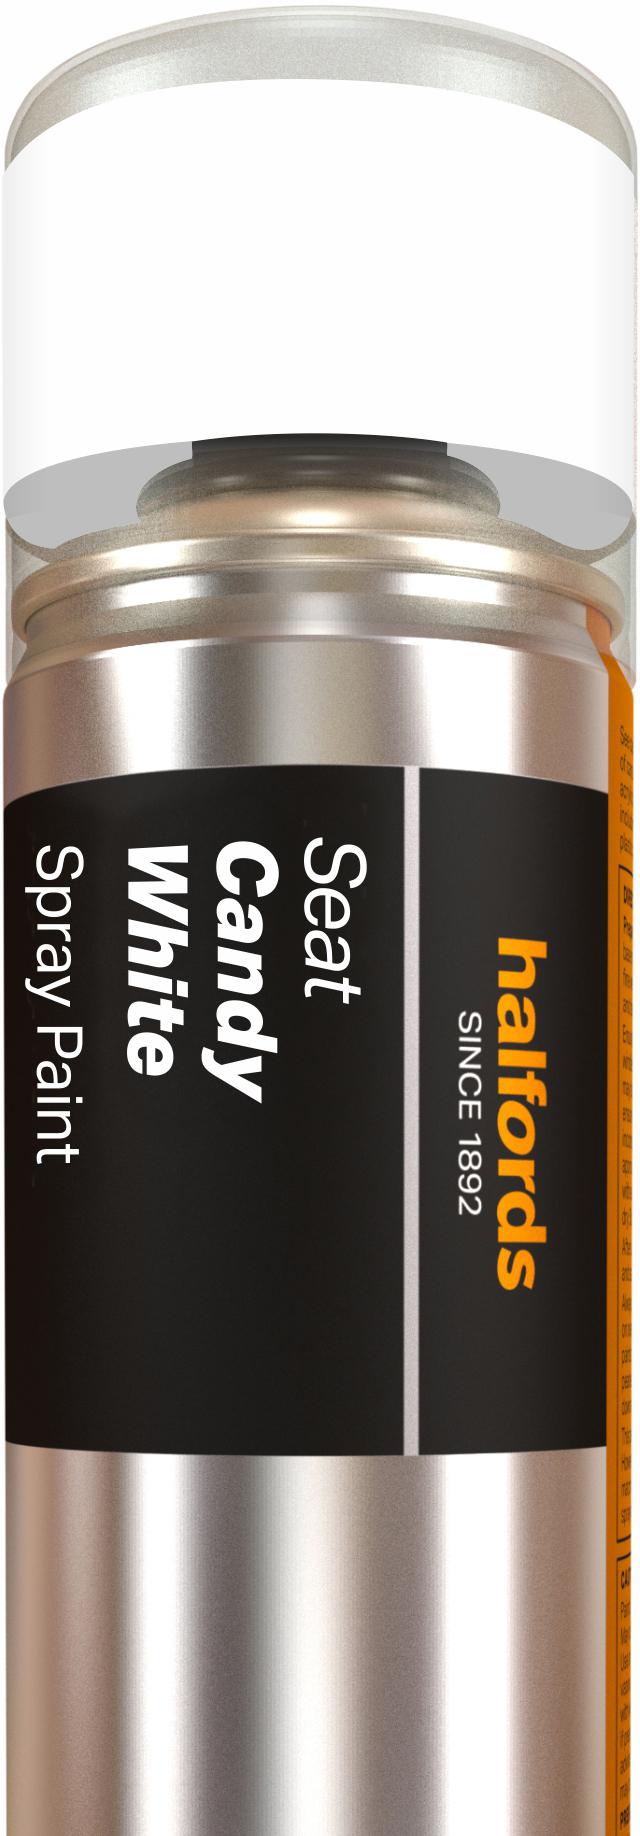 Halfords Seat Candy White Car Spray Paint 300Ml